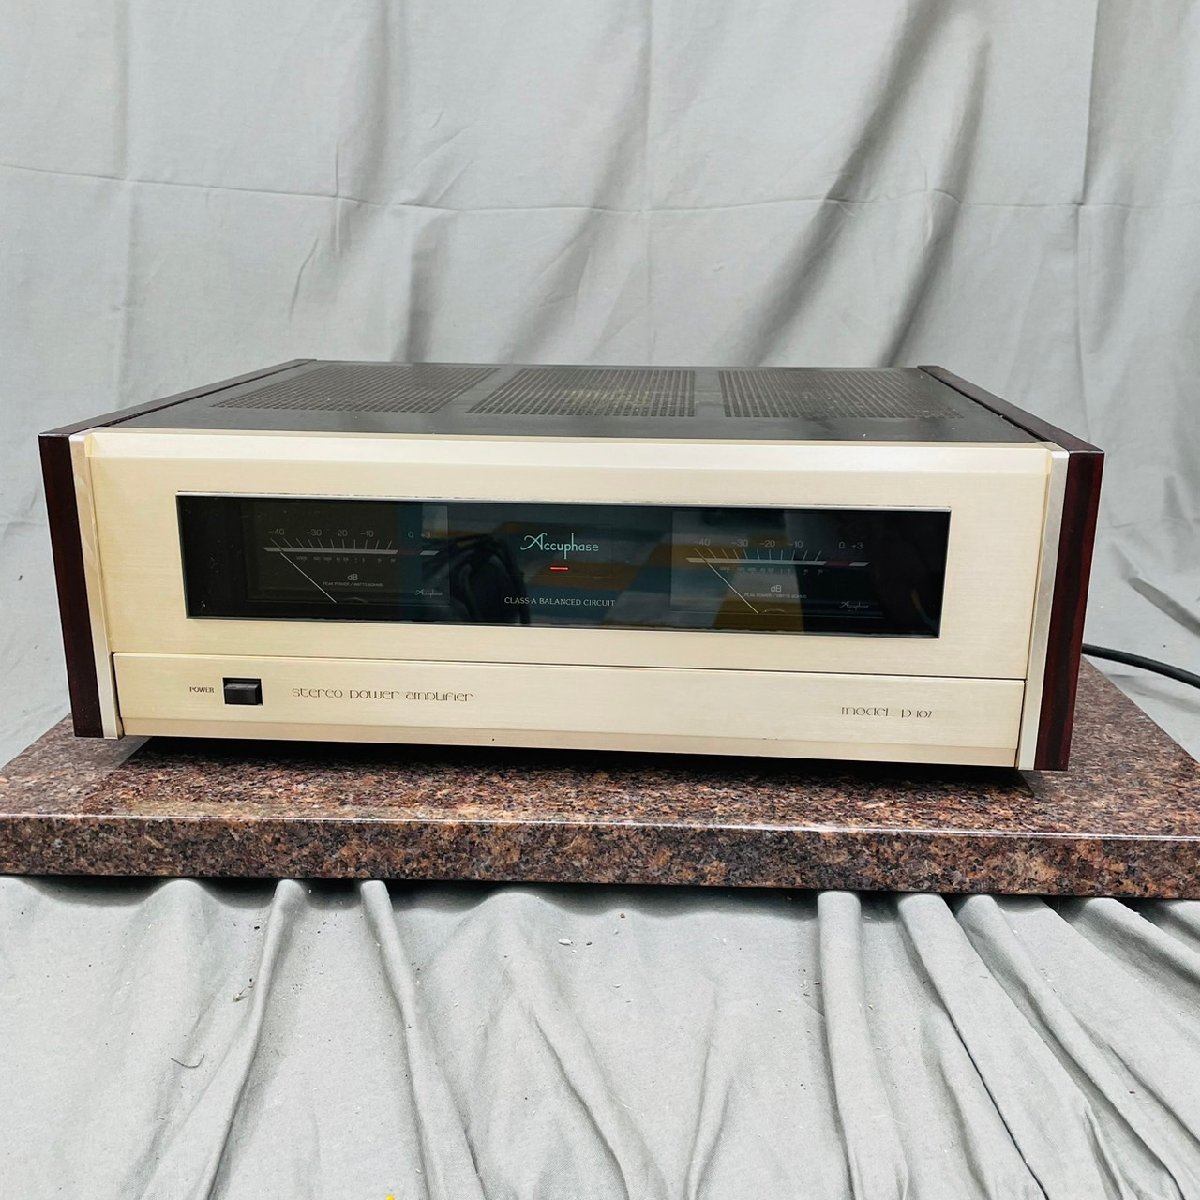 T4063＊【ジャンク】Accuphase アキュフェーズ P-102 ステレオパワーアンプ_画像2